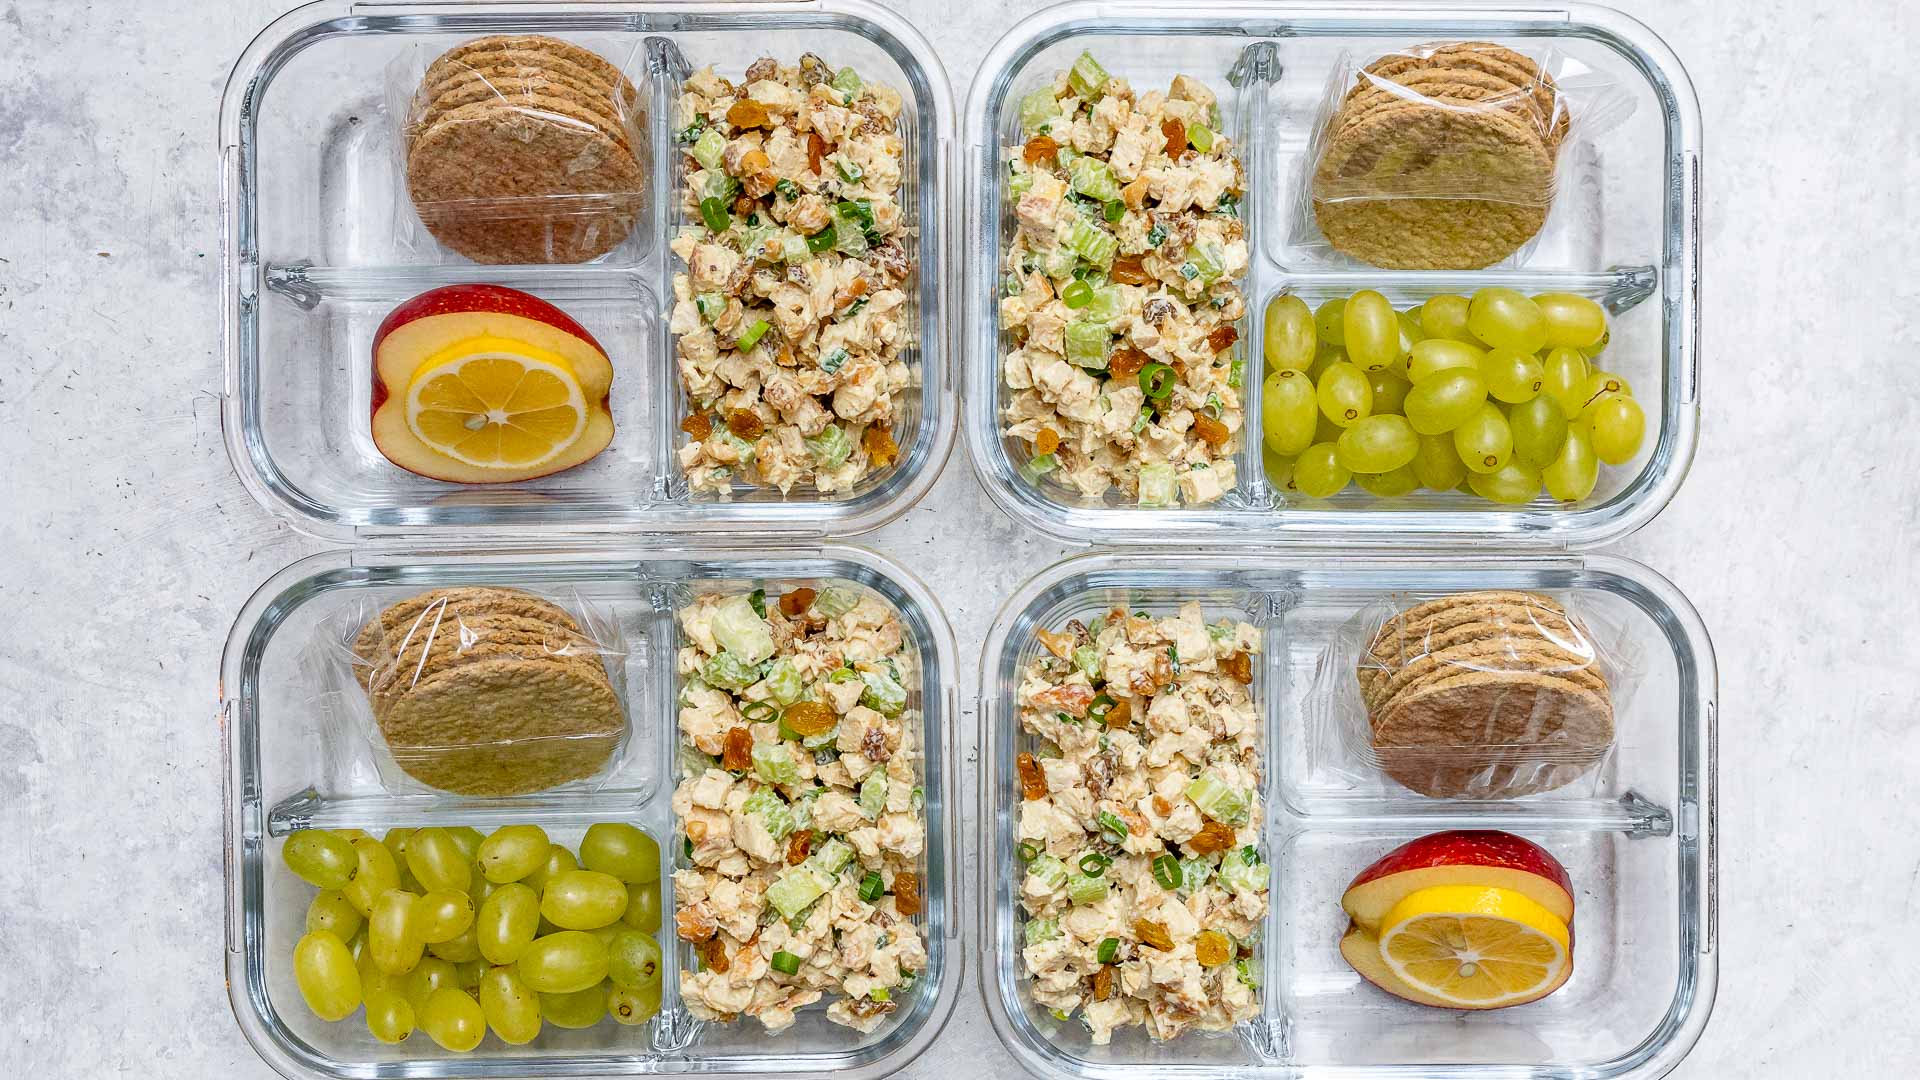 https://cleanfoodcrush.com/wp-content/uploads/2019/11/Eating-Clean-Chicken-Salad-Meal-Prep.jpg